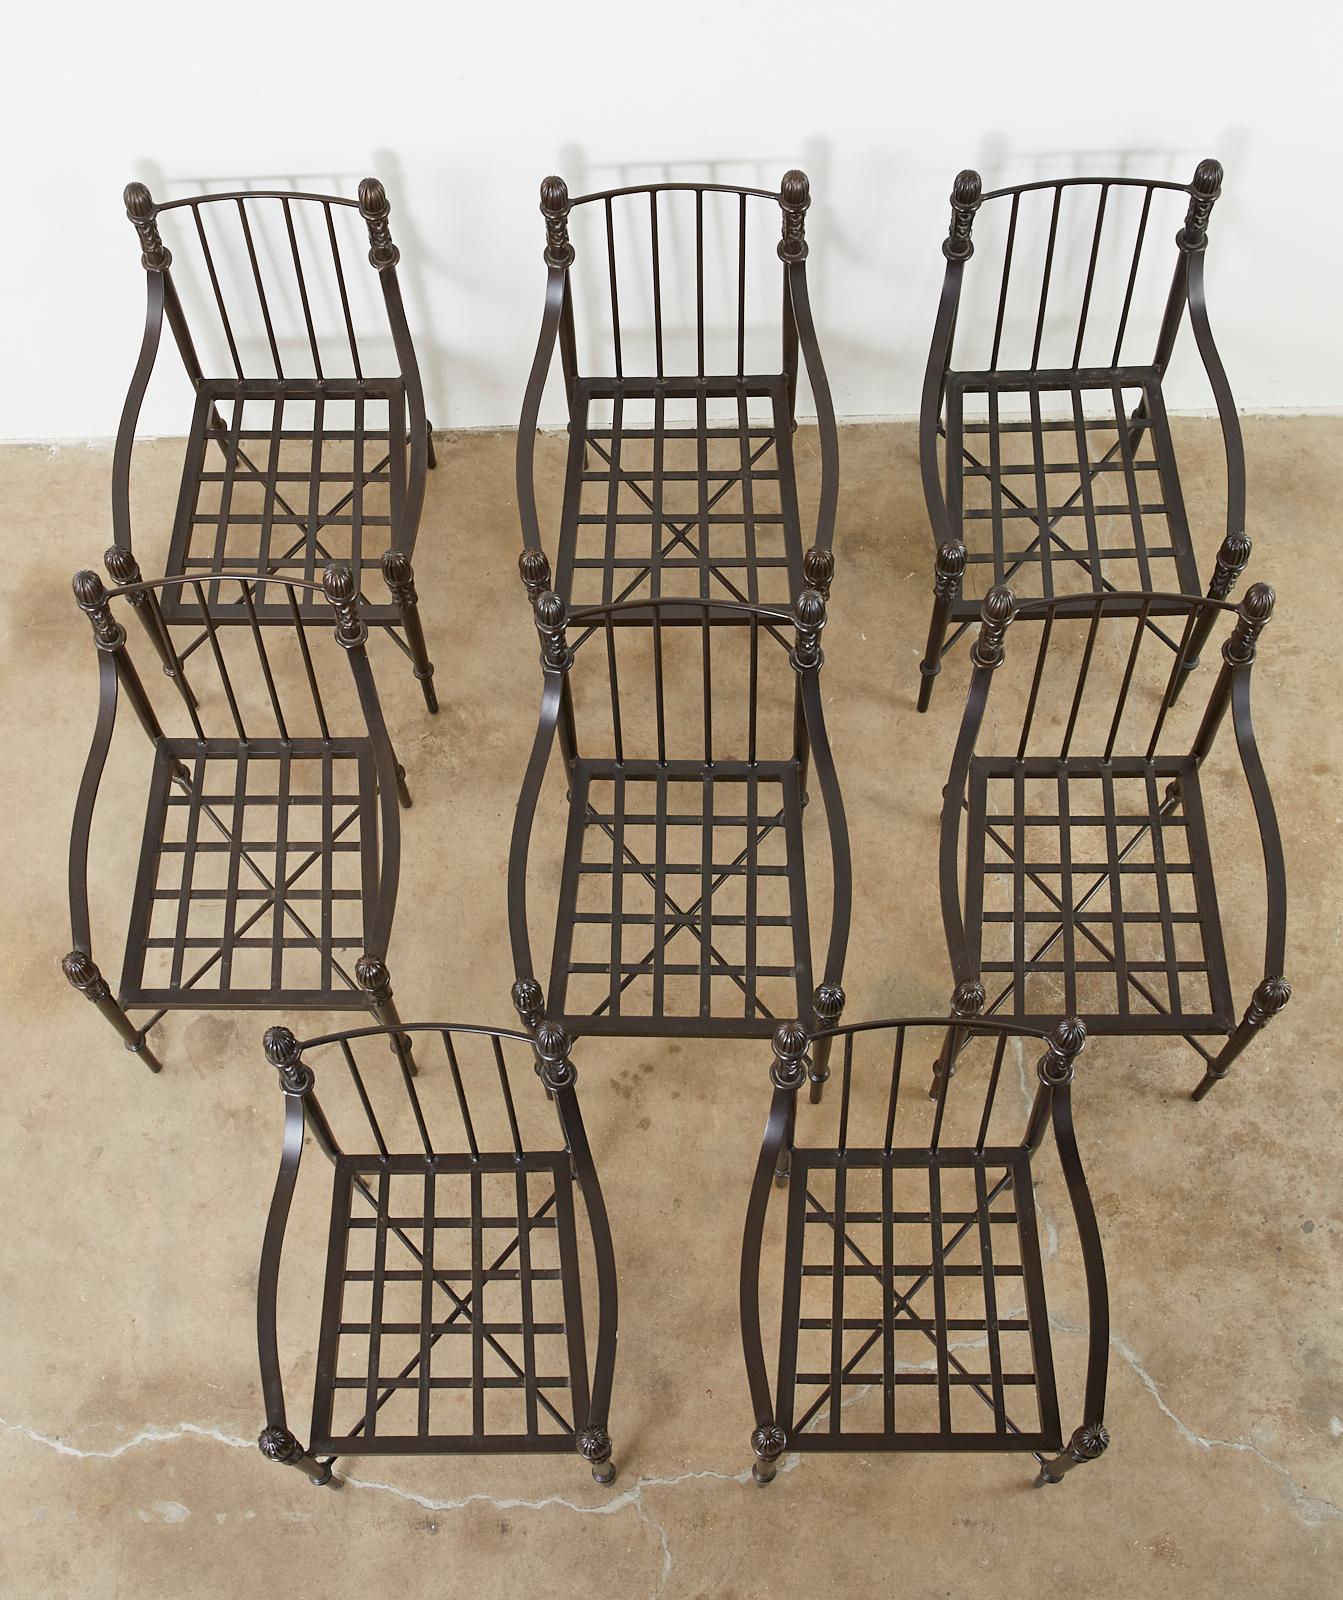 Stately set of eight bronzed solid aluminum garden dining chairs by Michael Taylor. From the Montecito line of California Style designs. These rare chairs are decorated with acanthus motifs and ball finials in the neoclassical style. Heavy and